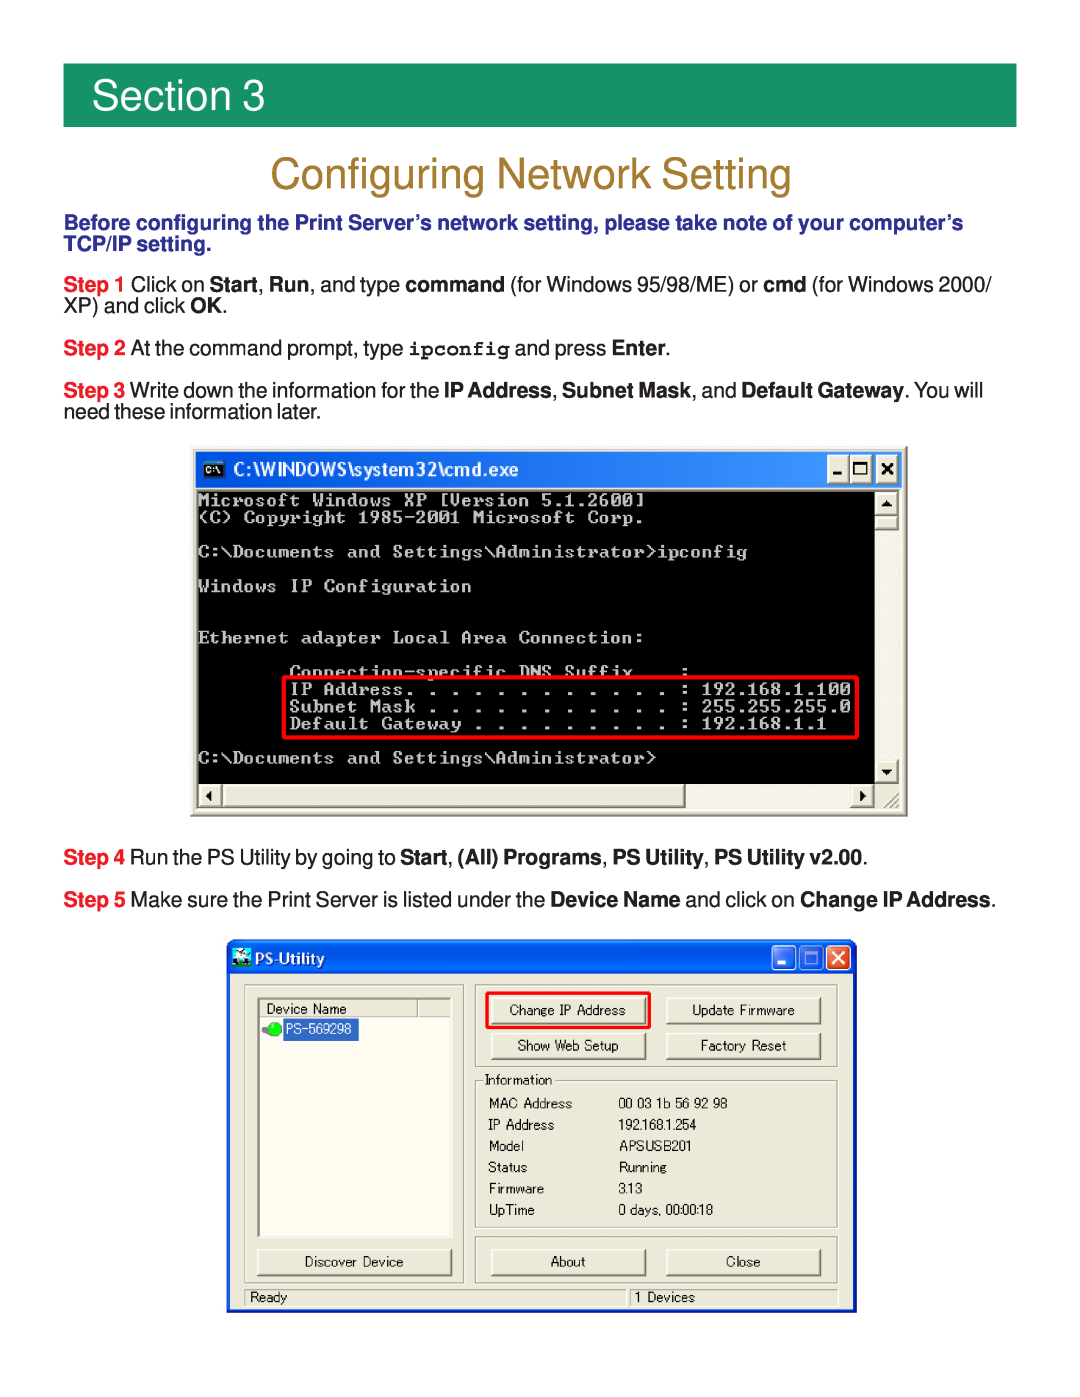 Airlink101 APSUSB201 manual Configuring Network Setting, Section, At the command prompt, type ipconfig and press Enter 